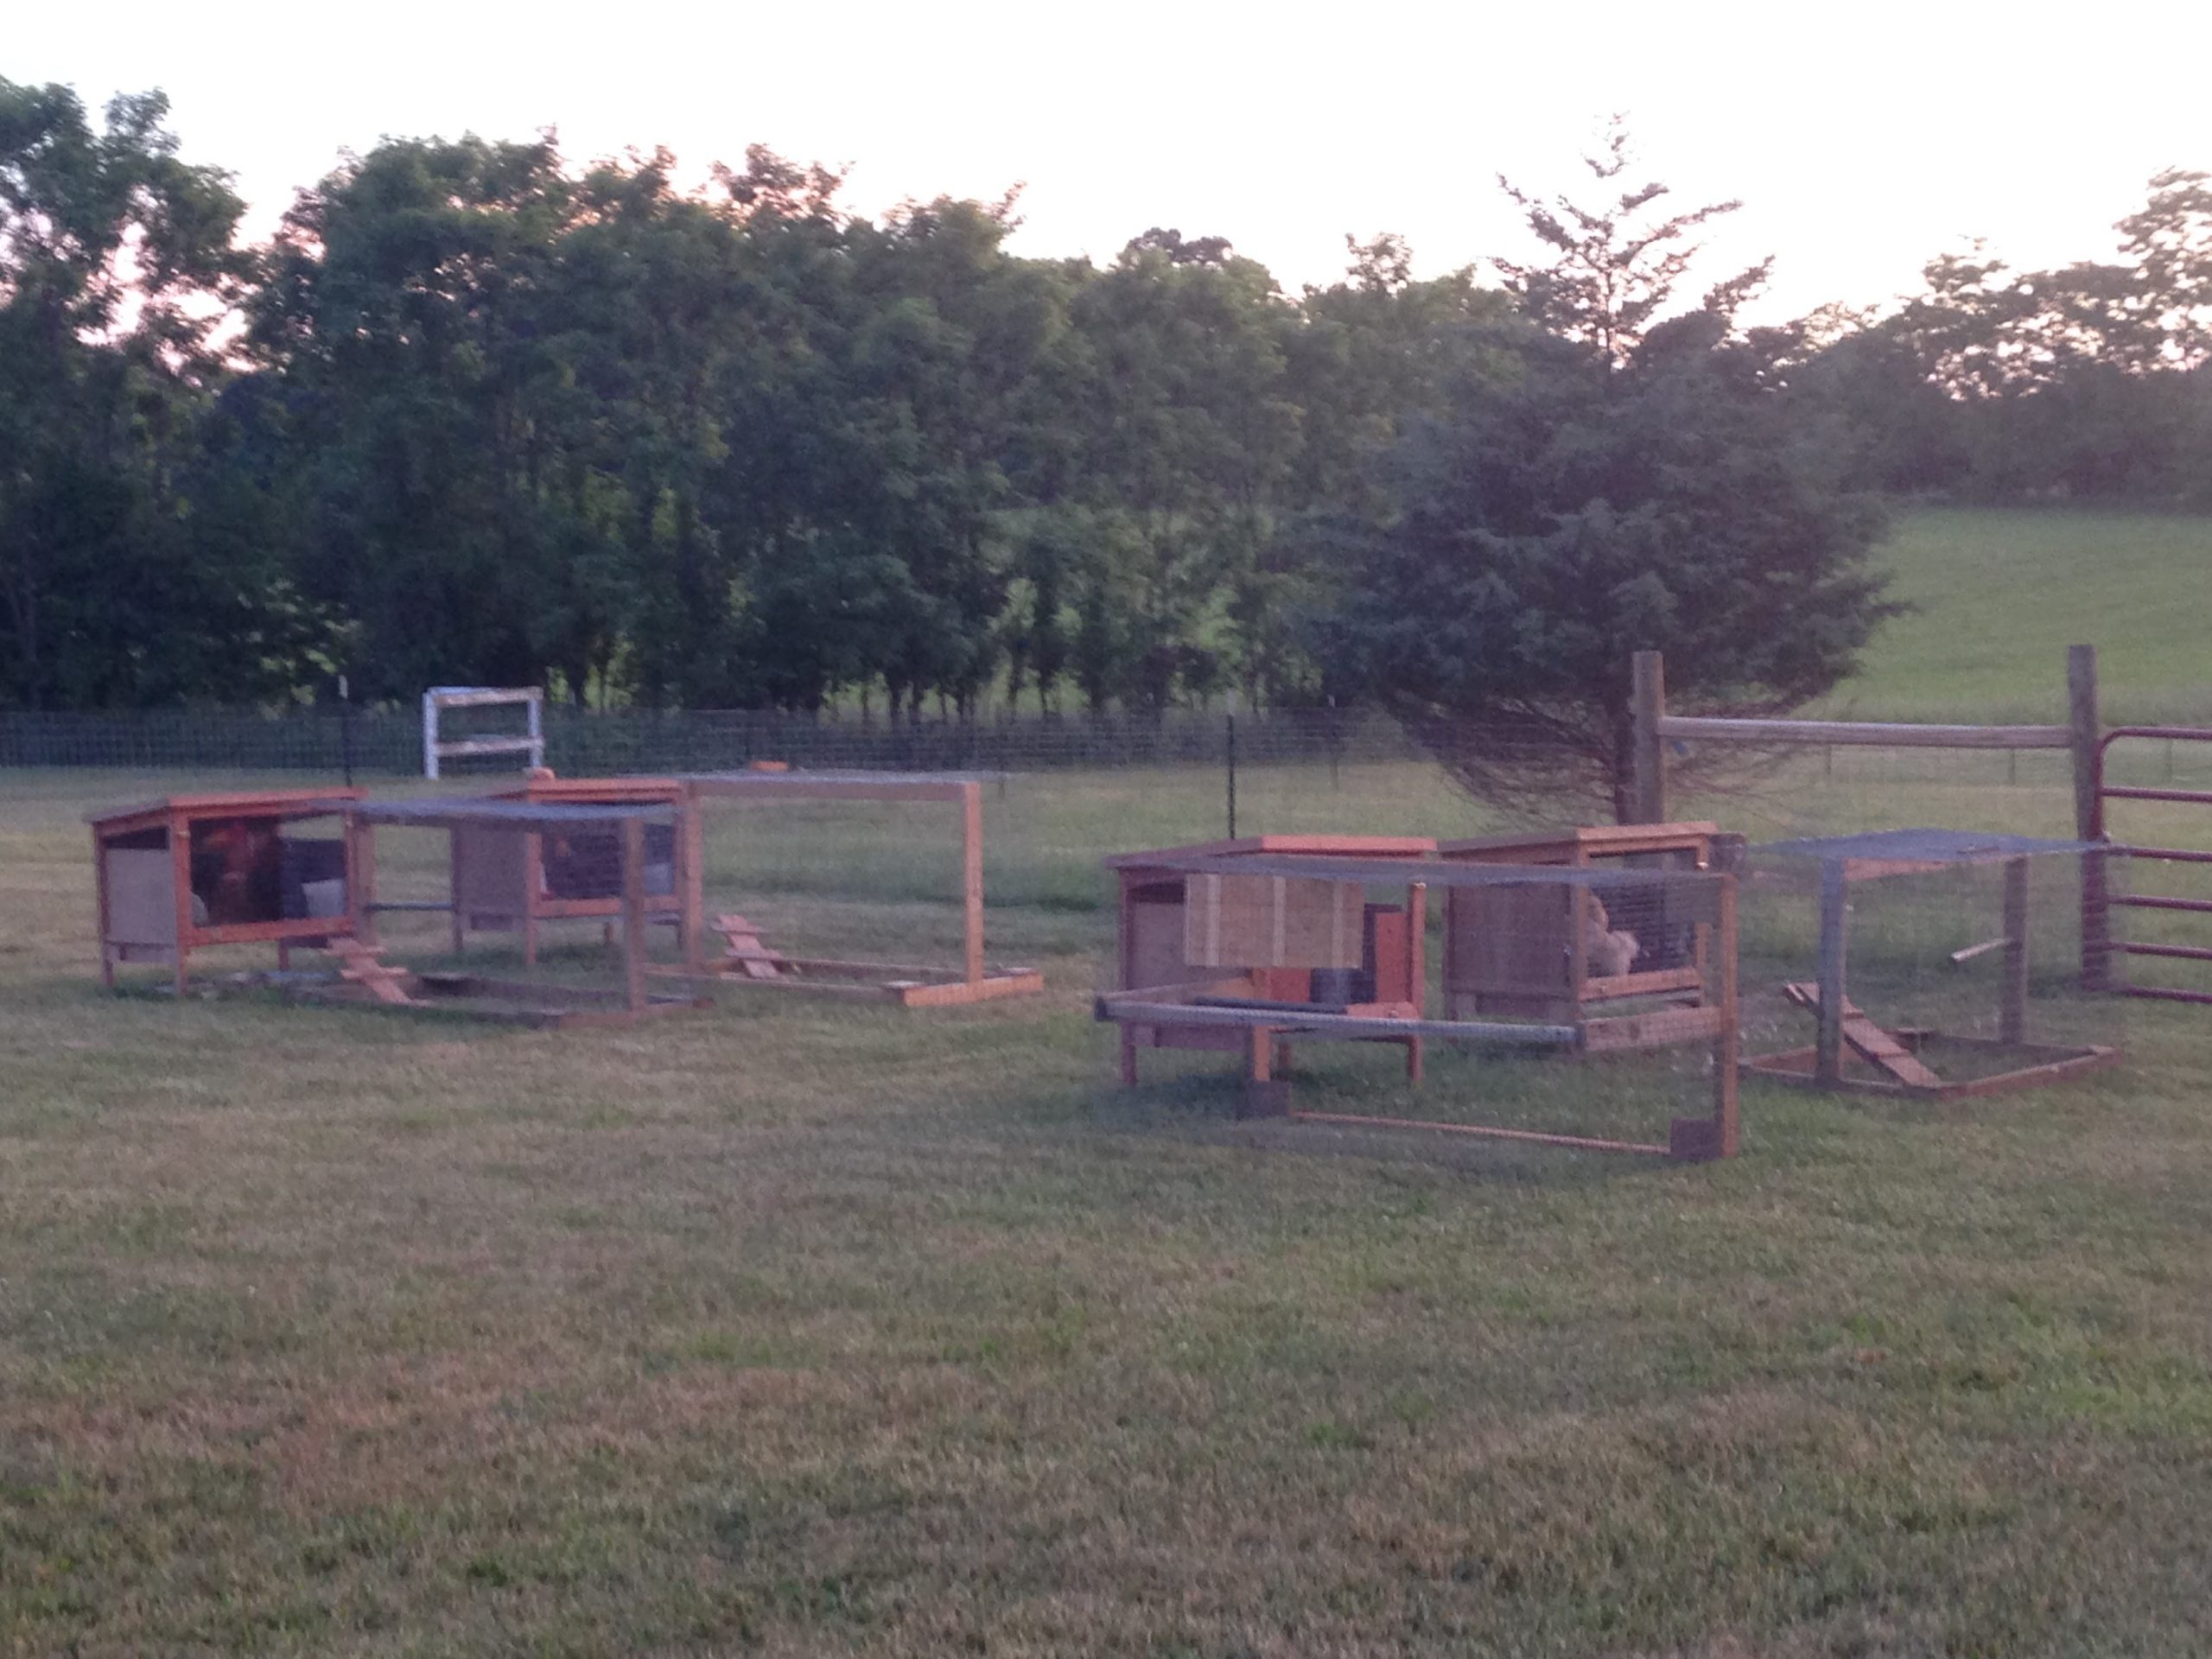 4 chicken coops with runs in a field